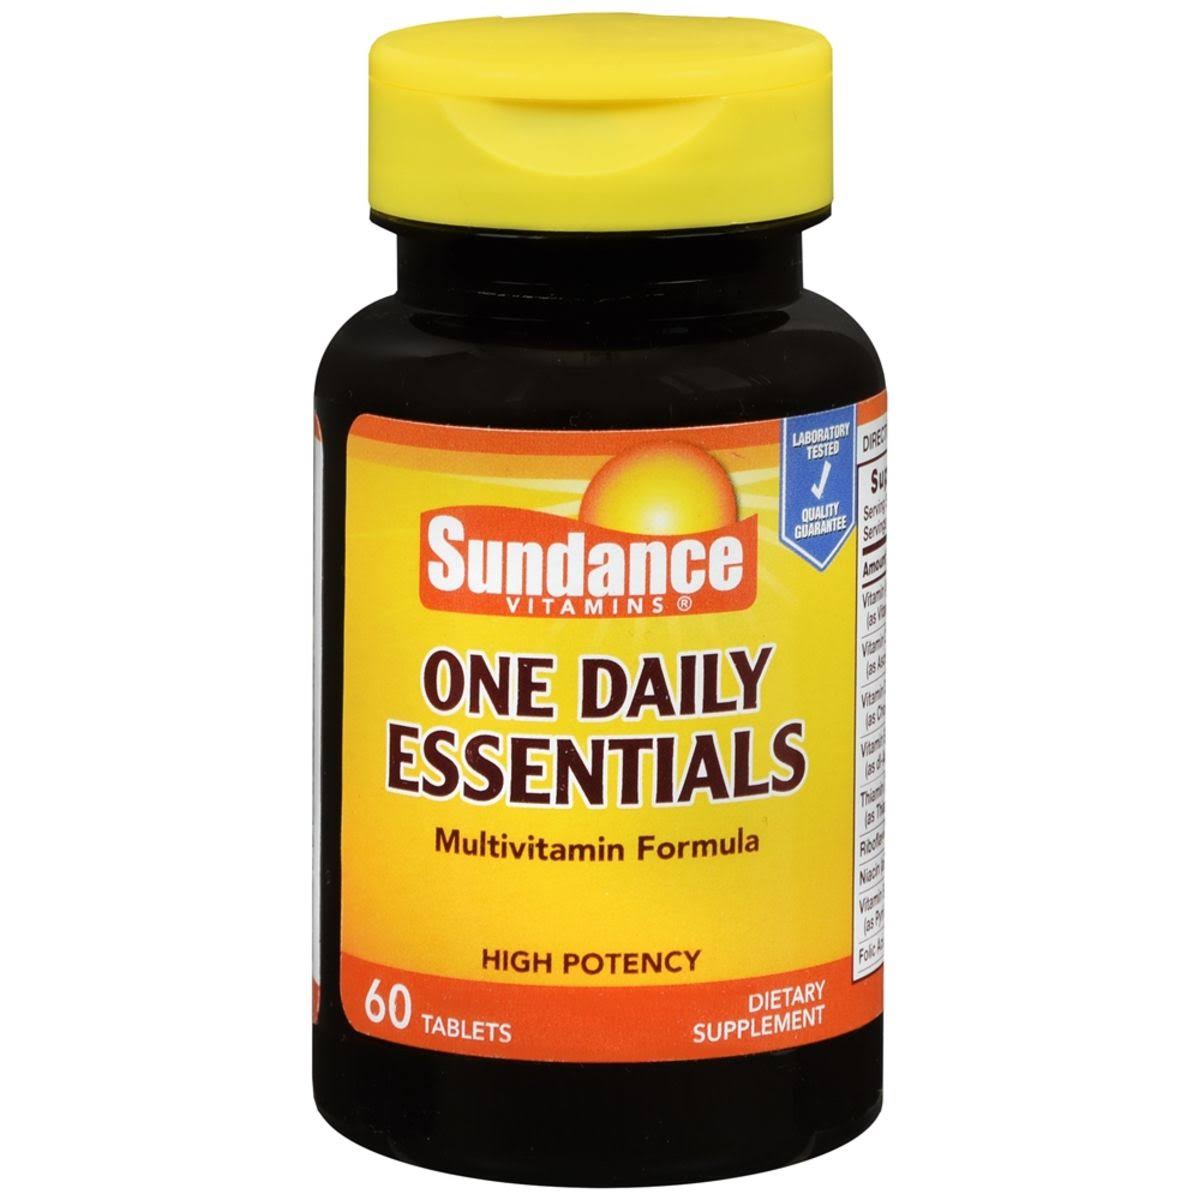 Sundance One Daily Essentials Tablets, 60 Tabs (Pack of 1)